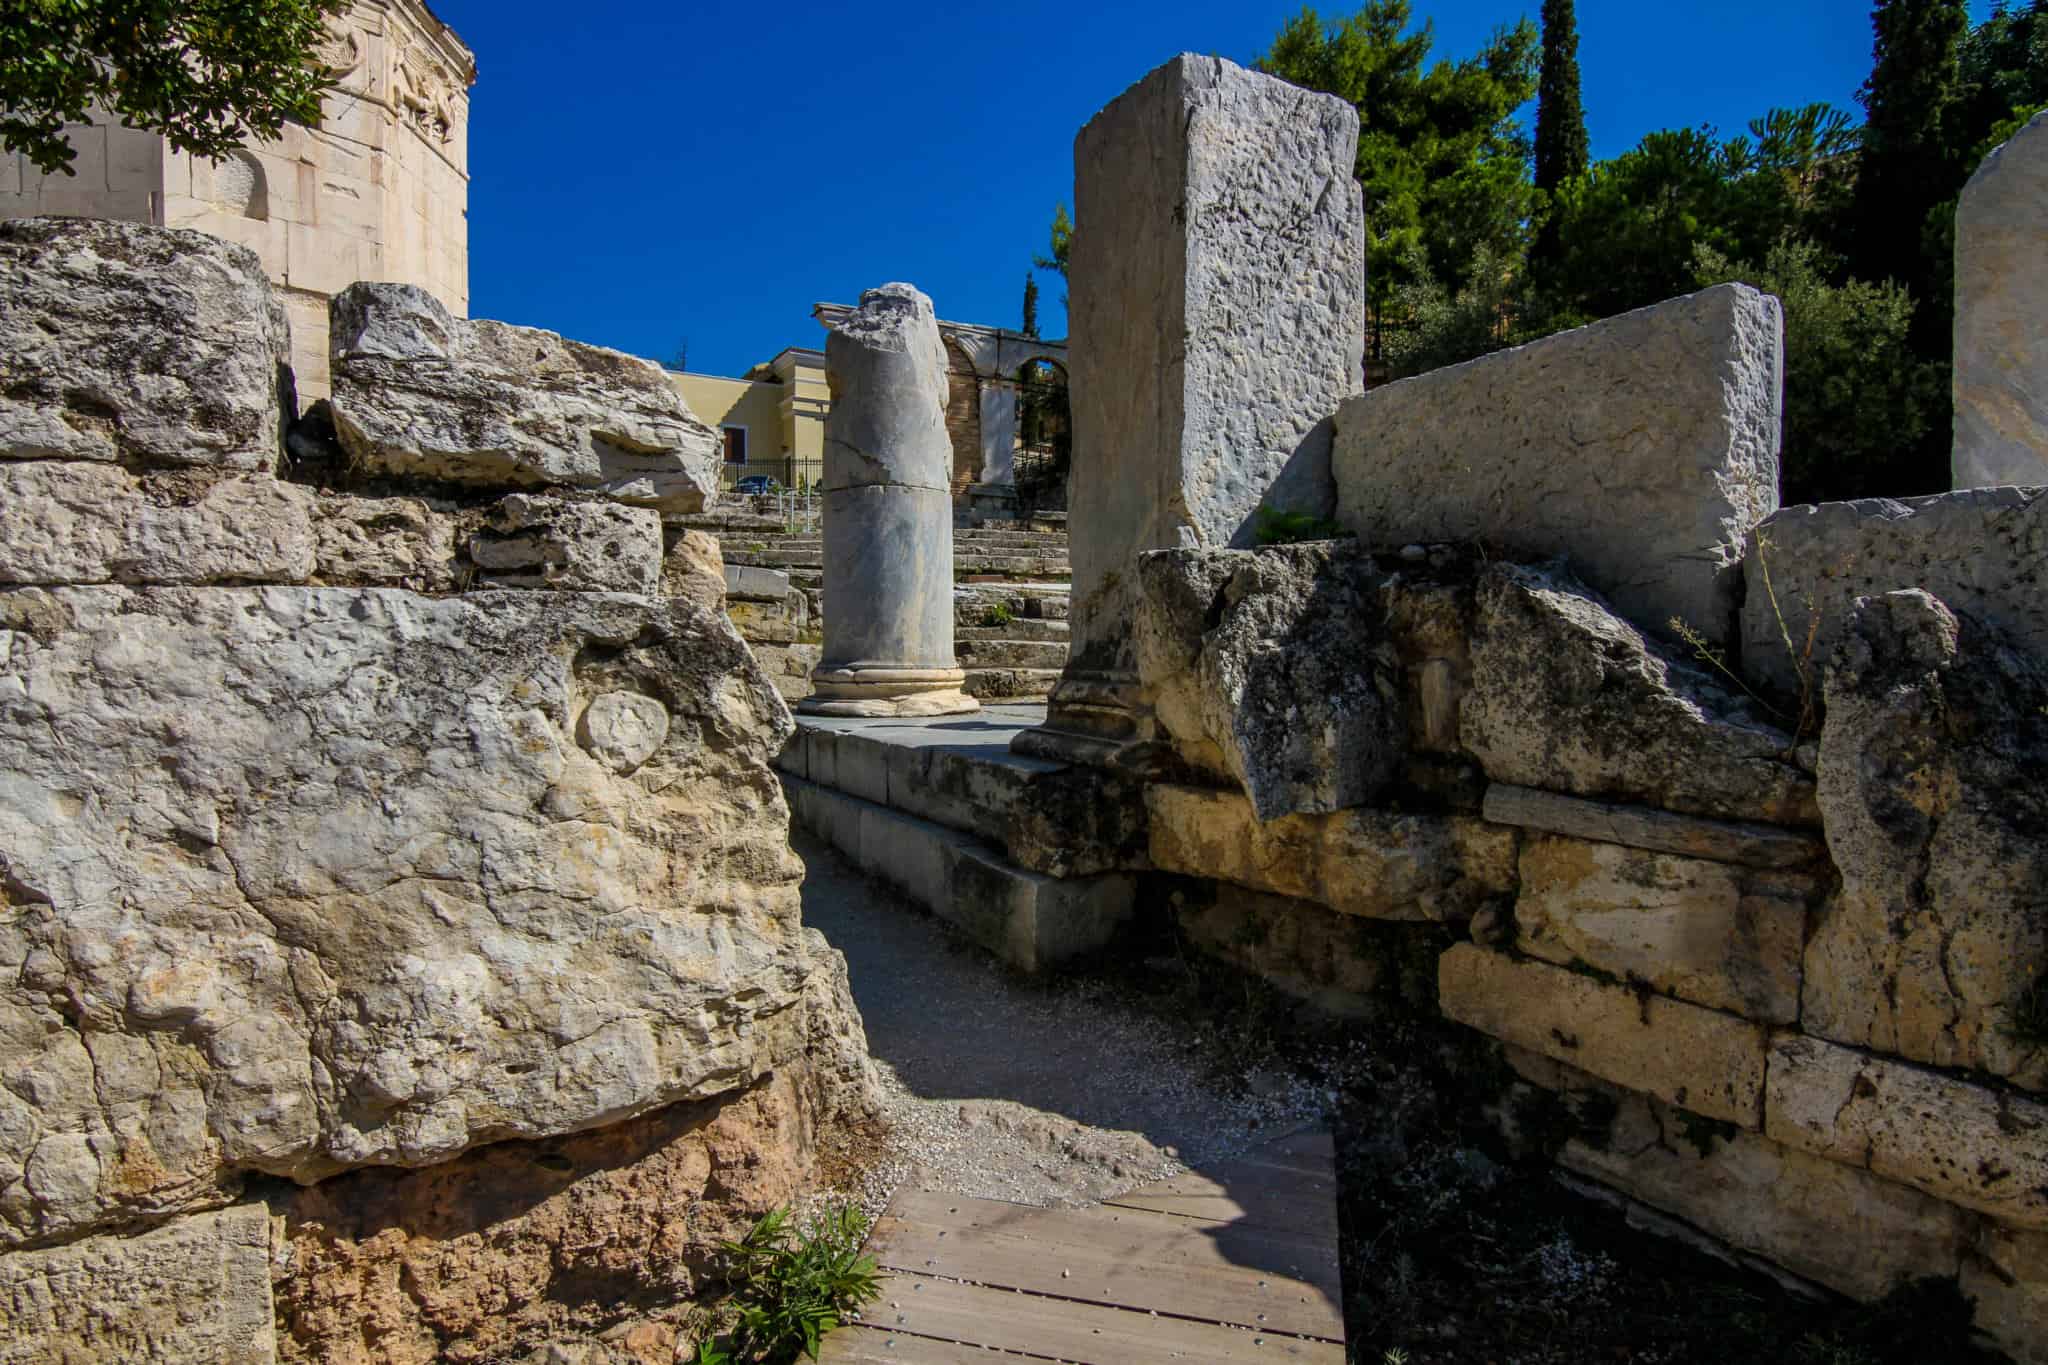 The Roman Agora is one of the ruins in Athens